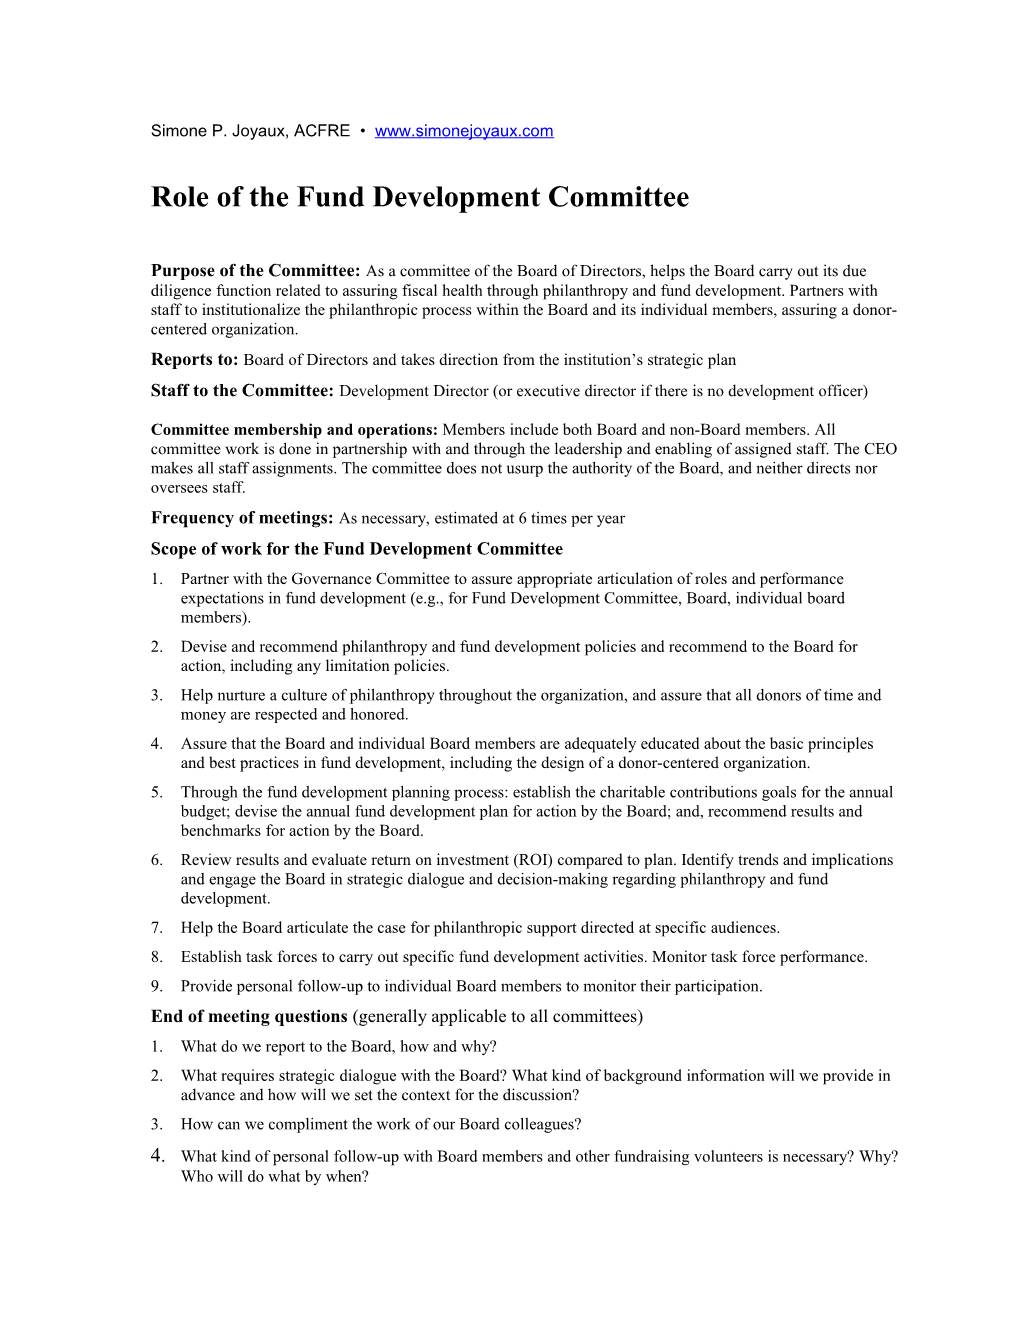 Role of the Fund Development Committee